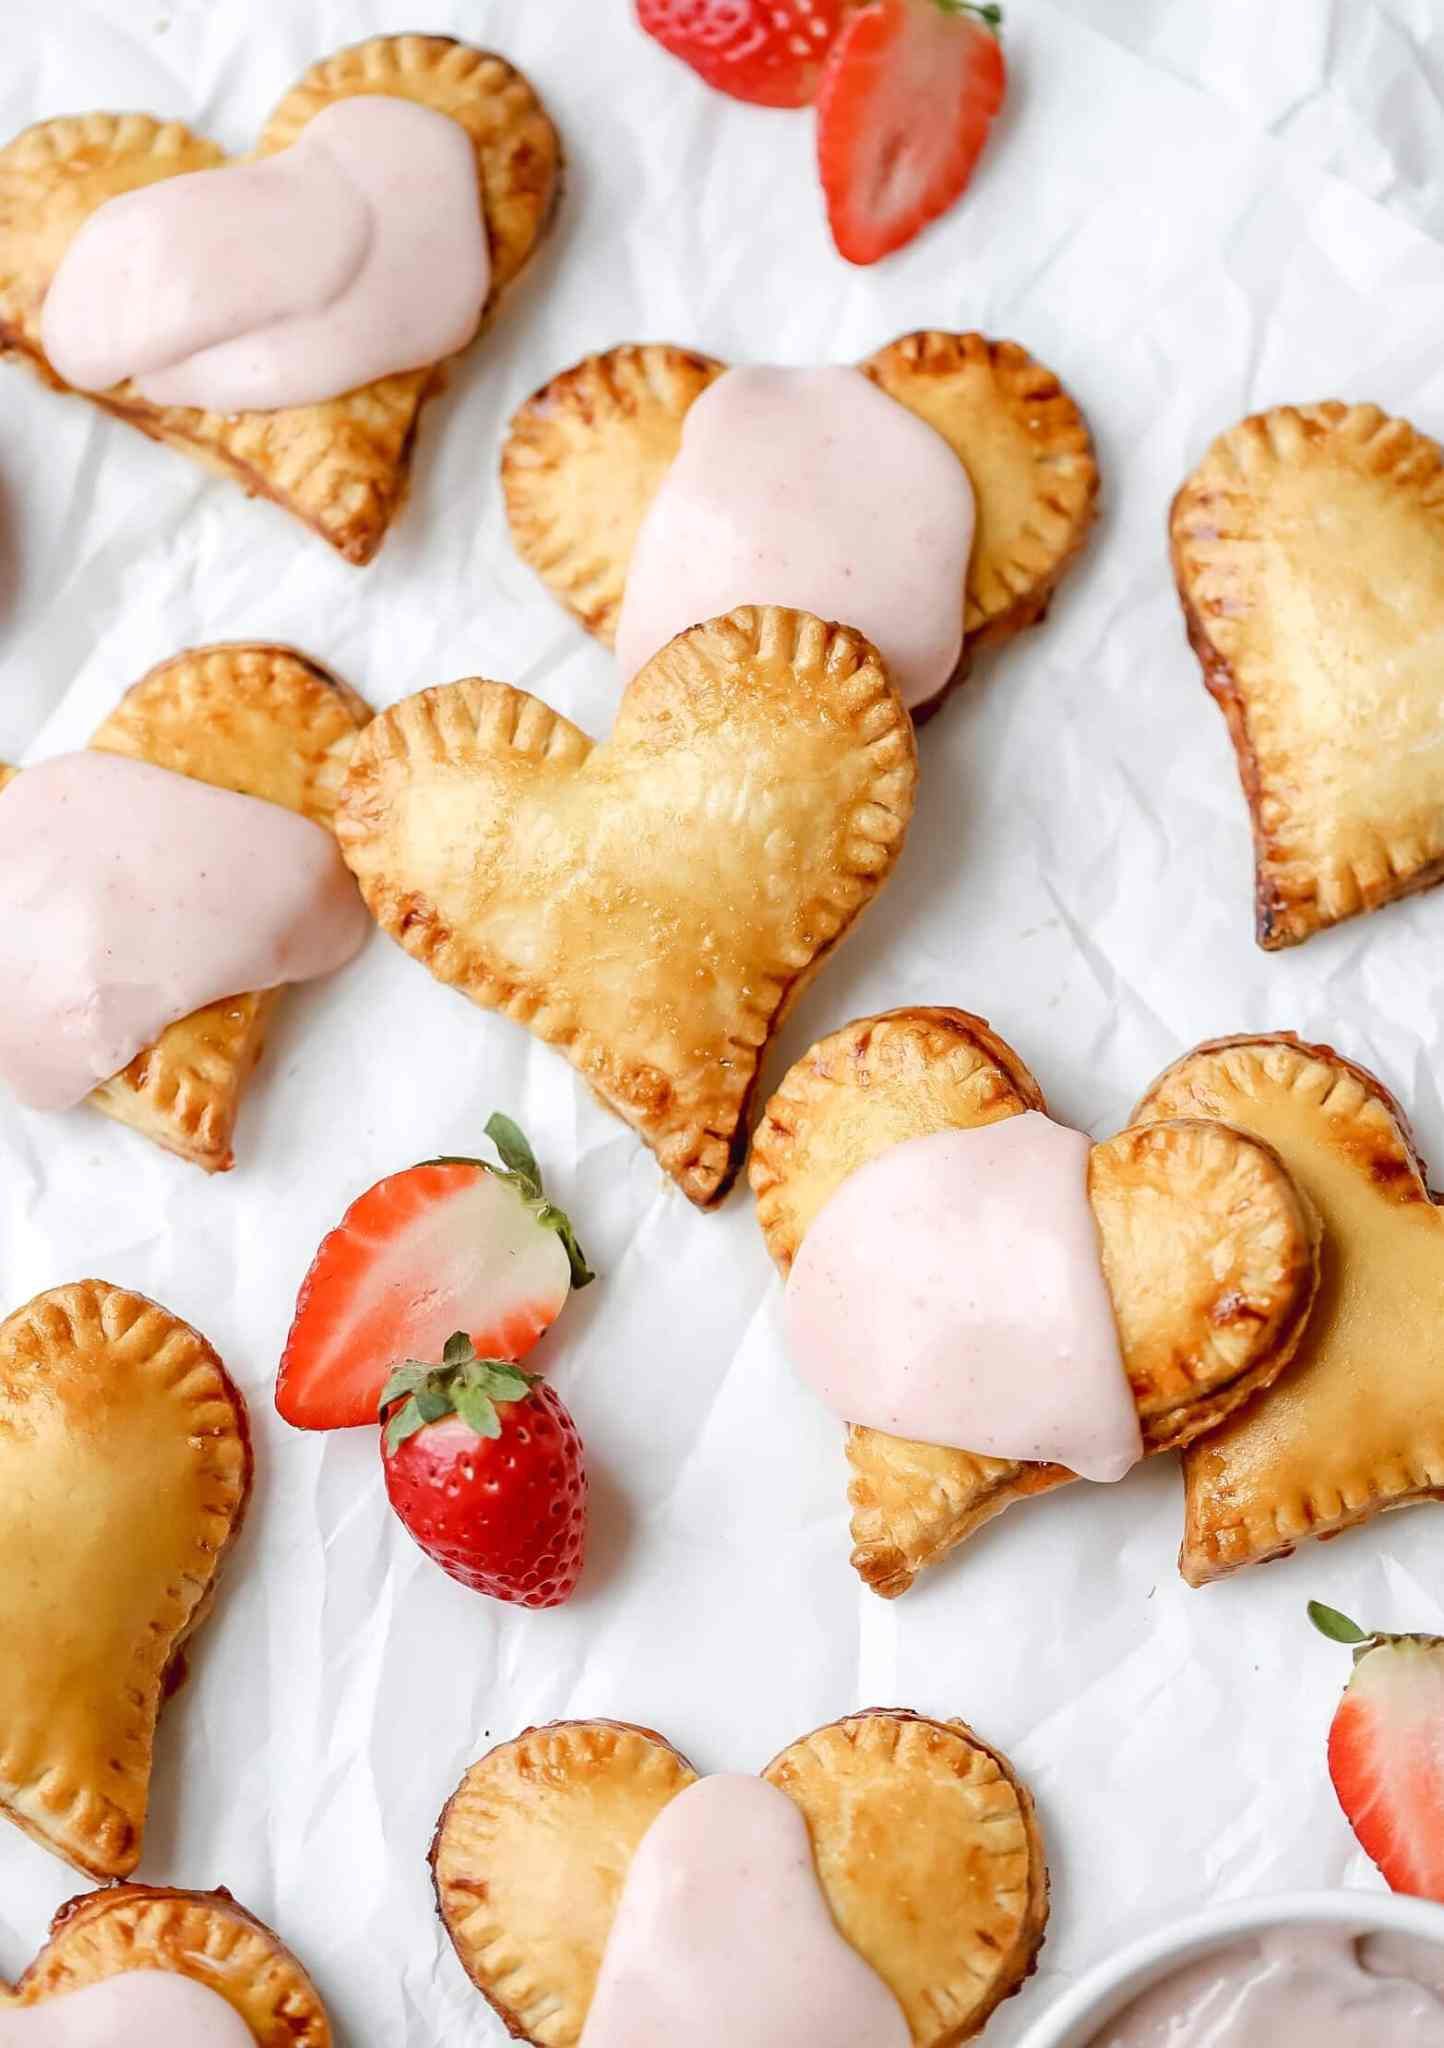 40 heart-shaped foods you can make for Valentine's Day with a